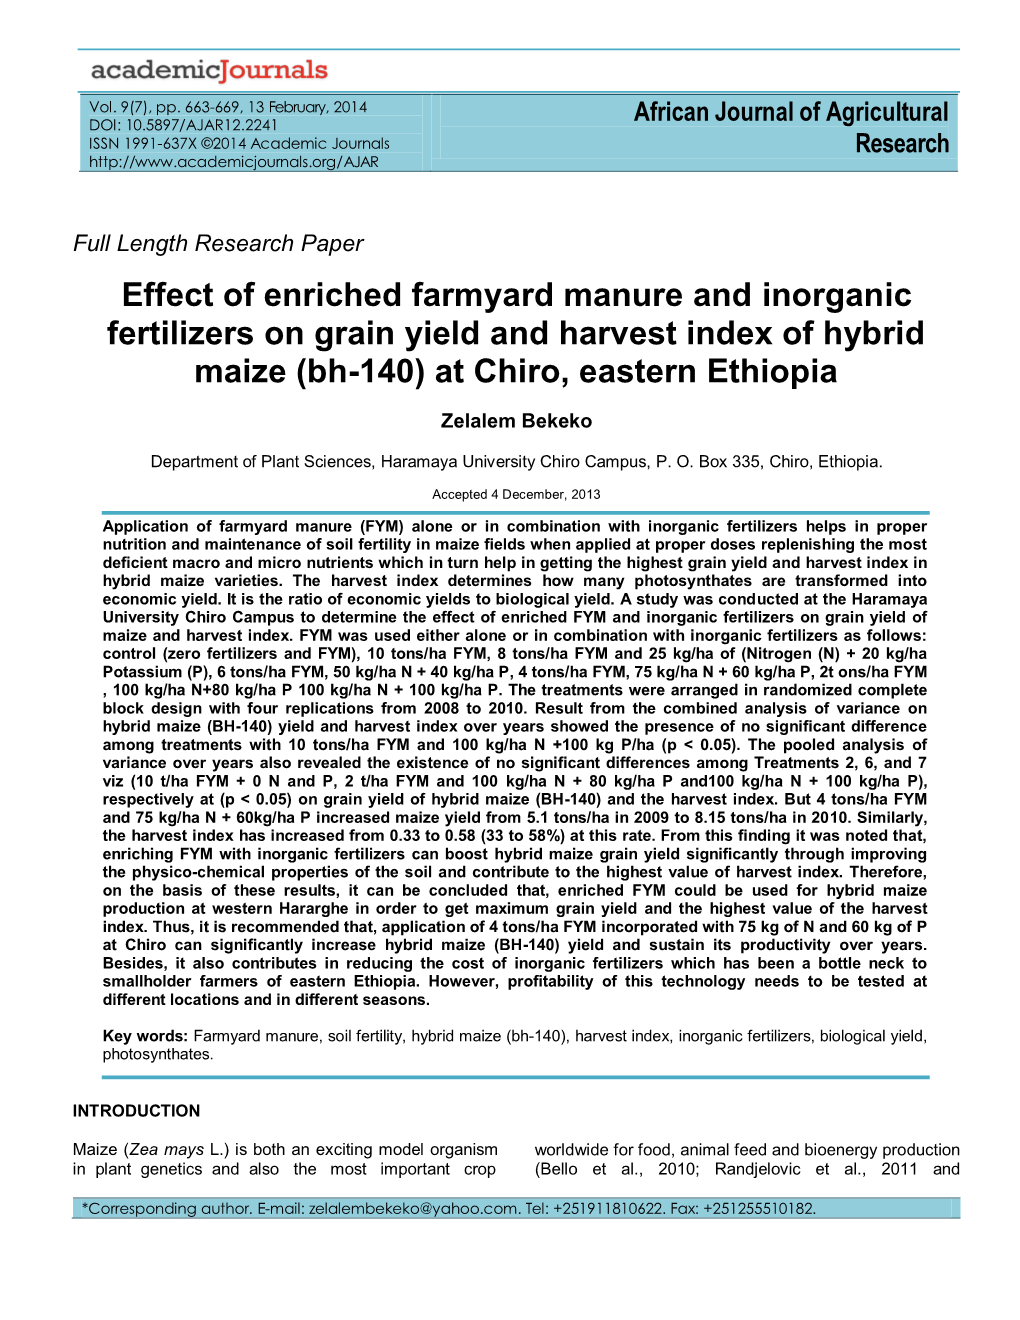 Effect of Enriched Farmyard Manure and Inorganic Fertilizers on Grain Yield and Harvest Index of Hybrid Maize (Bh-140) at Chiro, Eastern Ethiopia